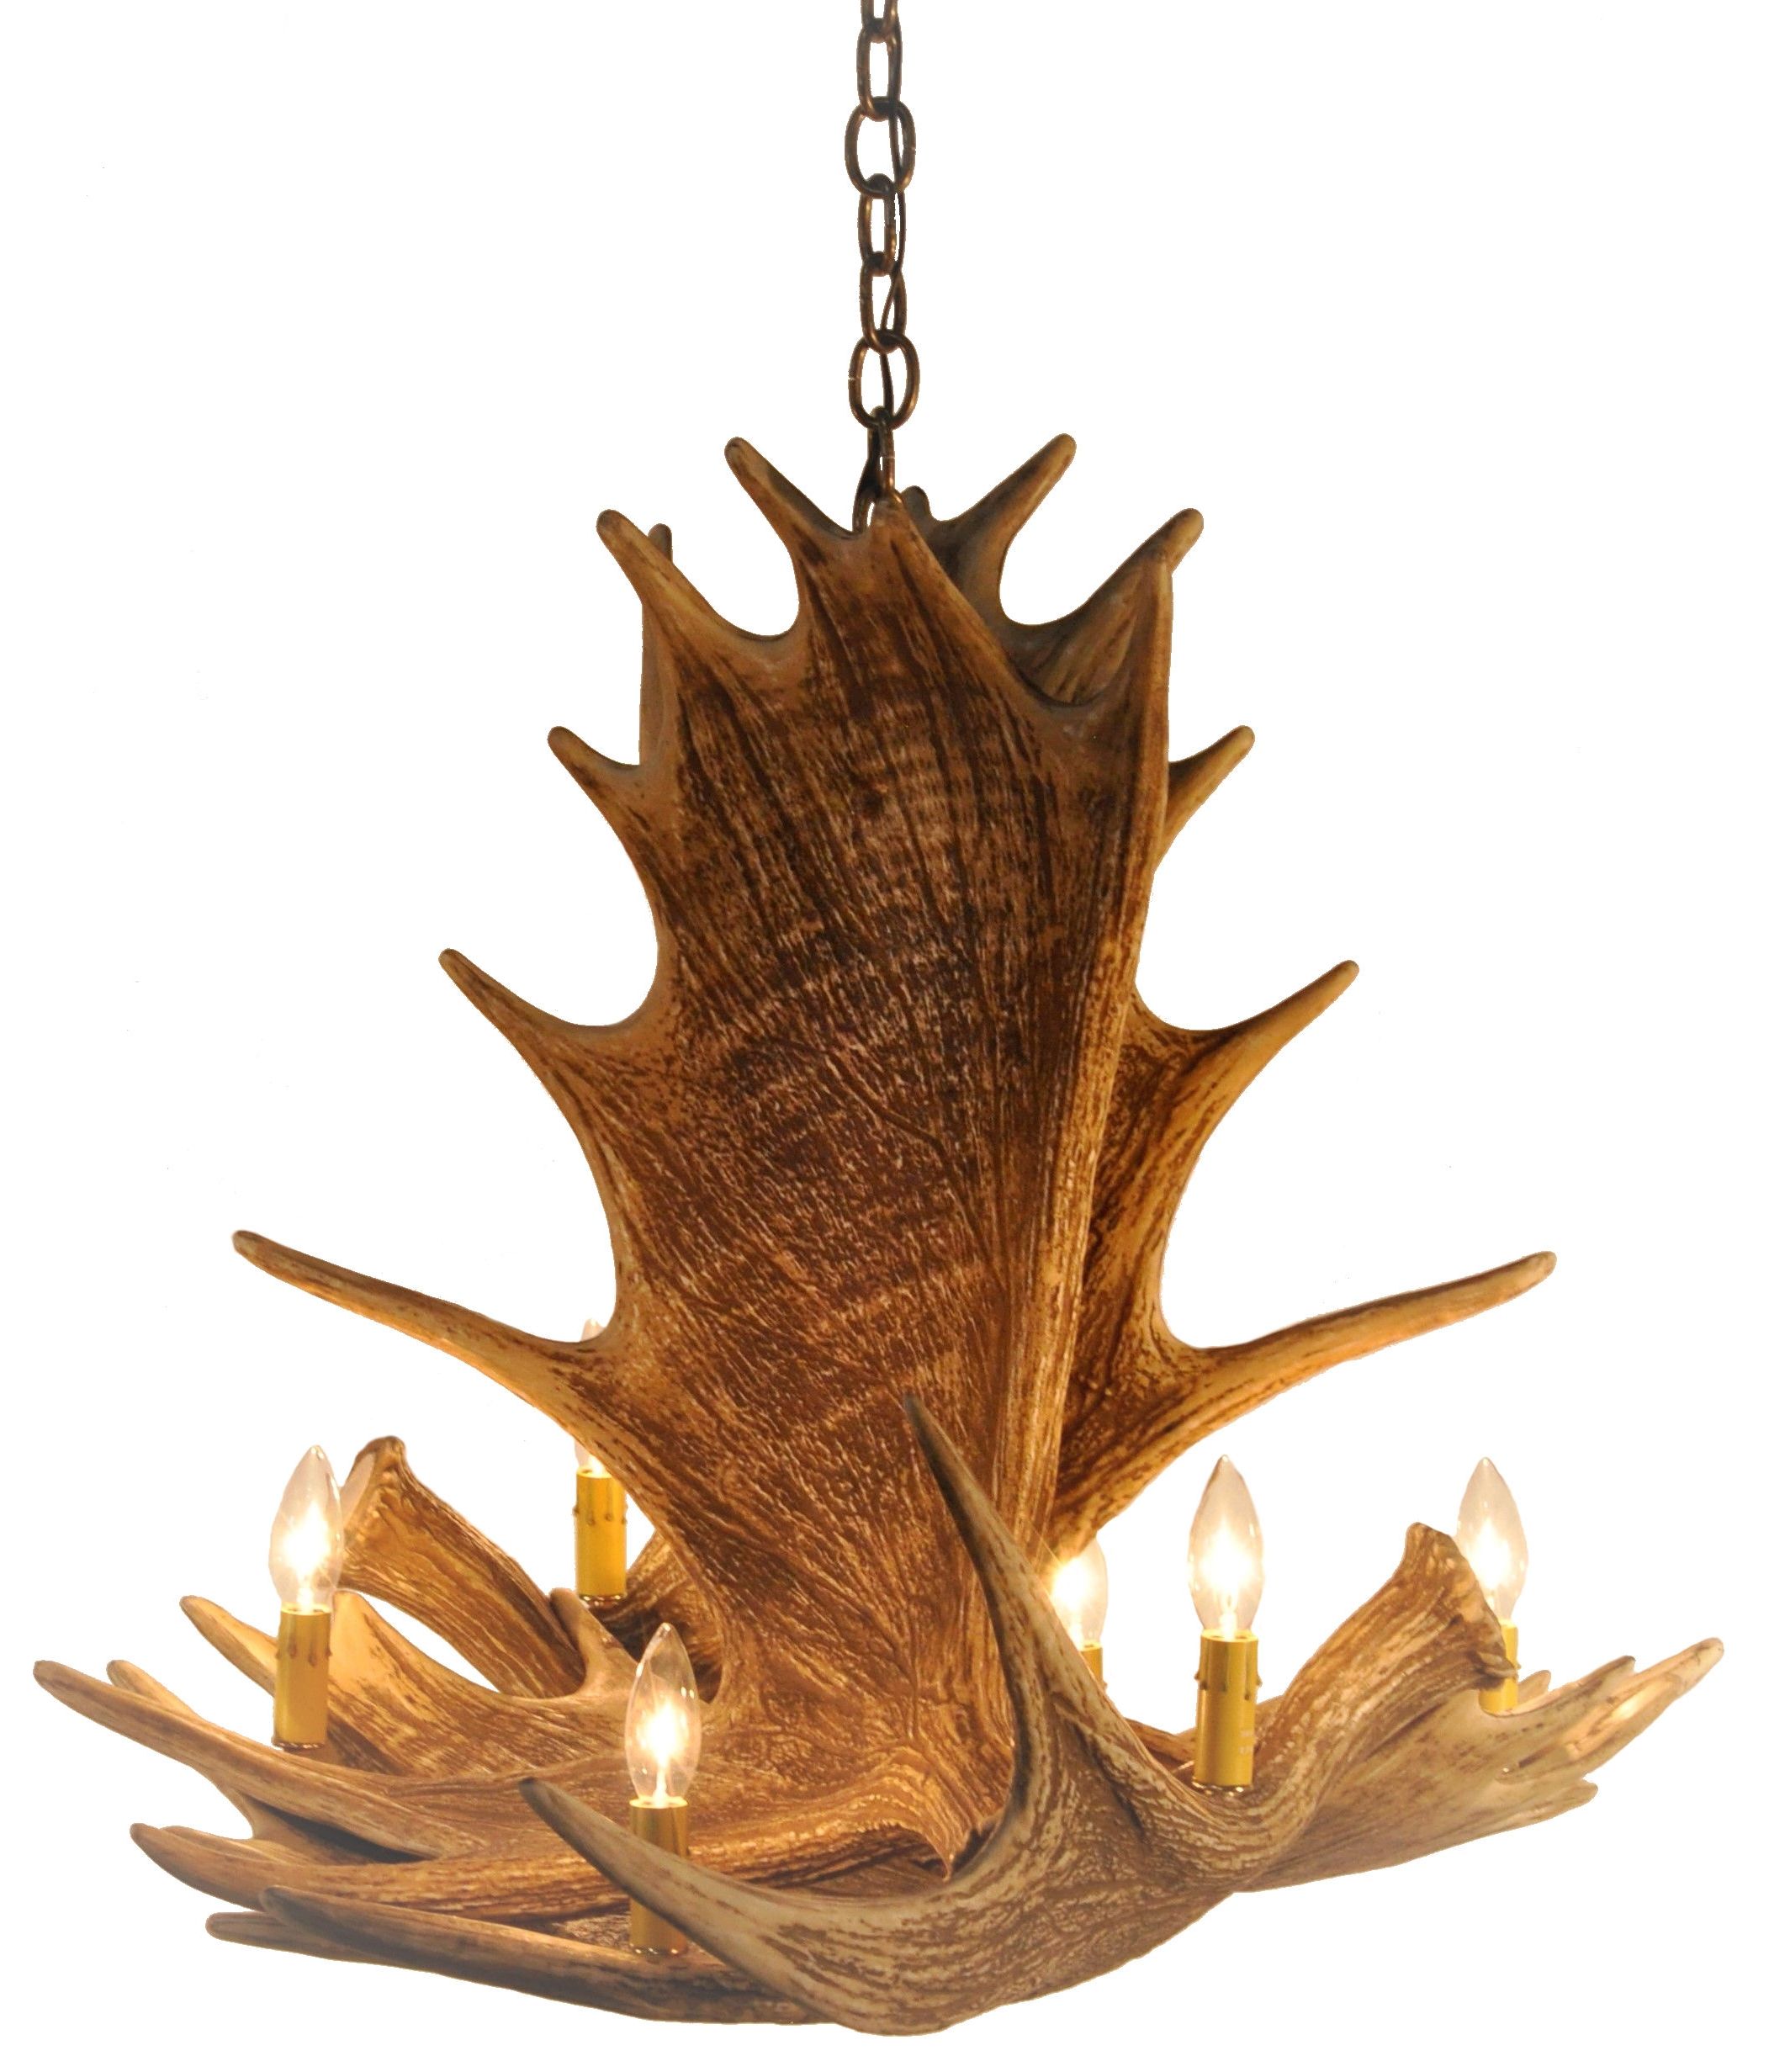 Cast Horn Designs In Most Current Antler Chandeliers (View 20 of 20)